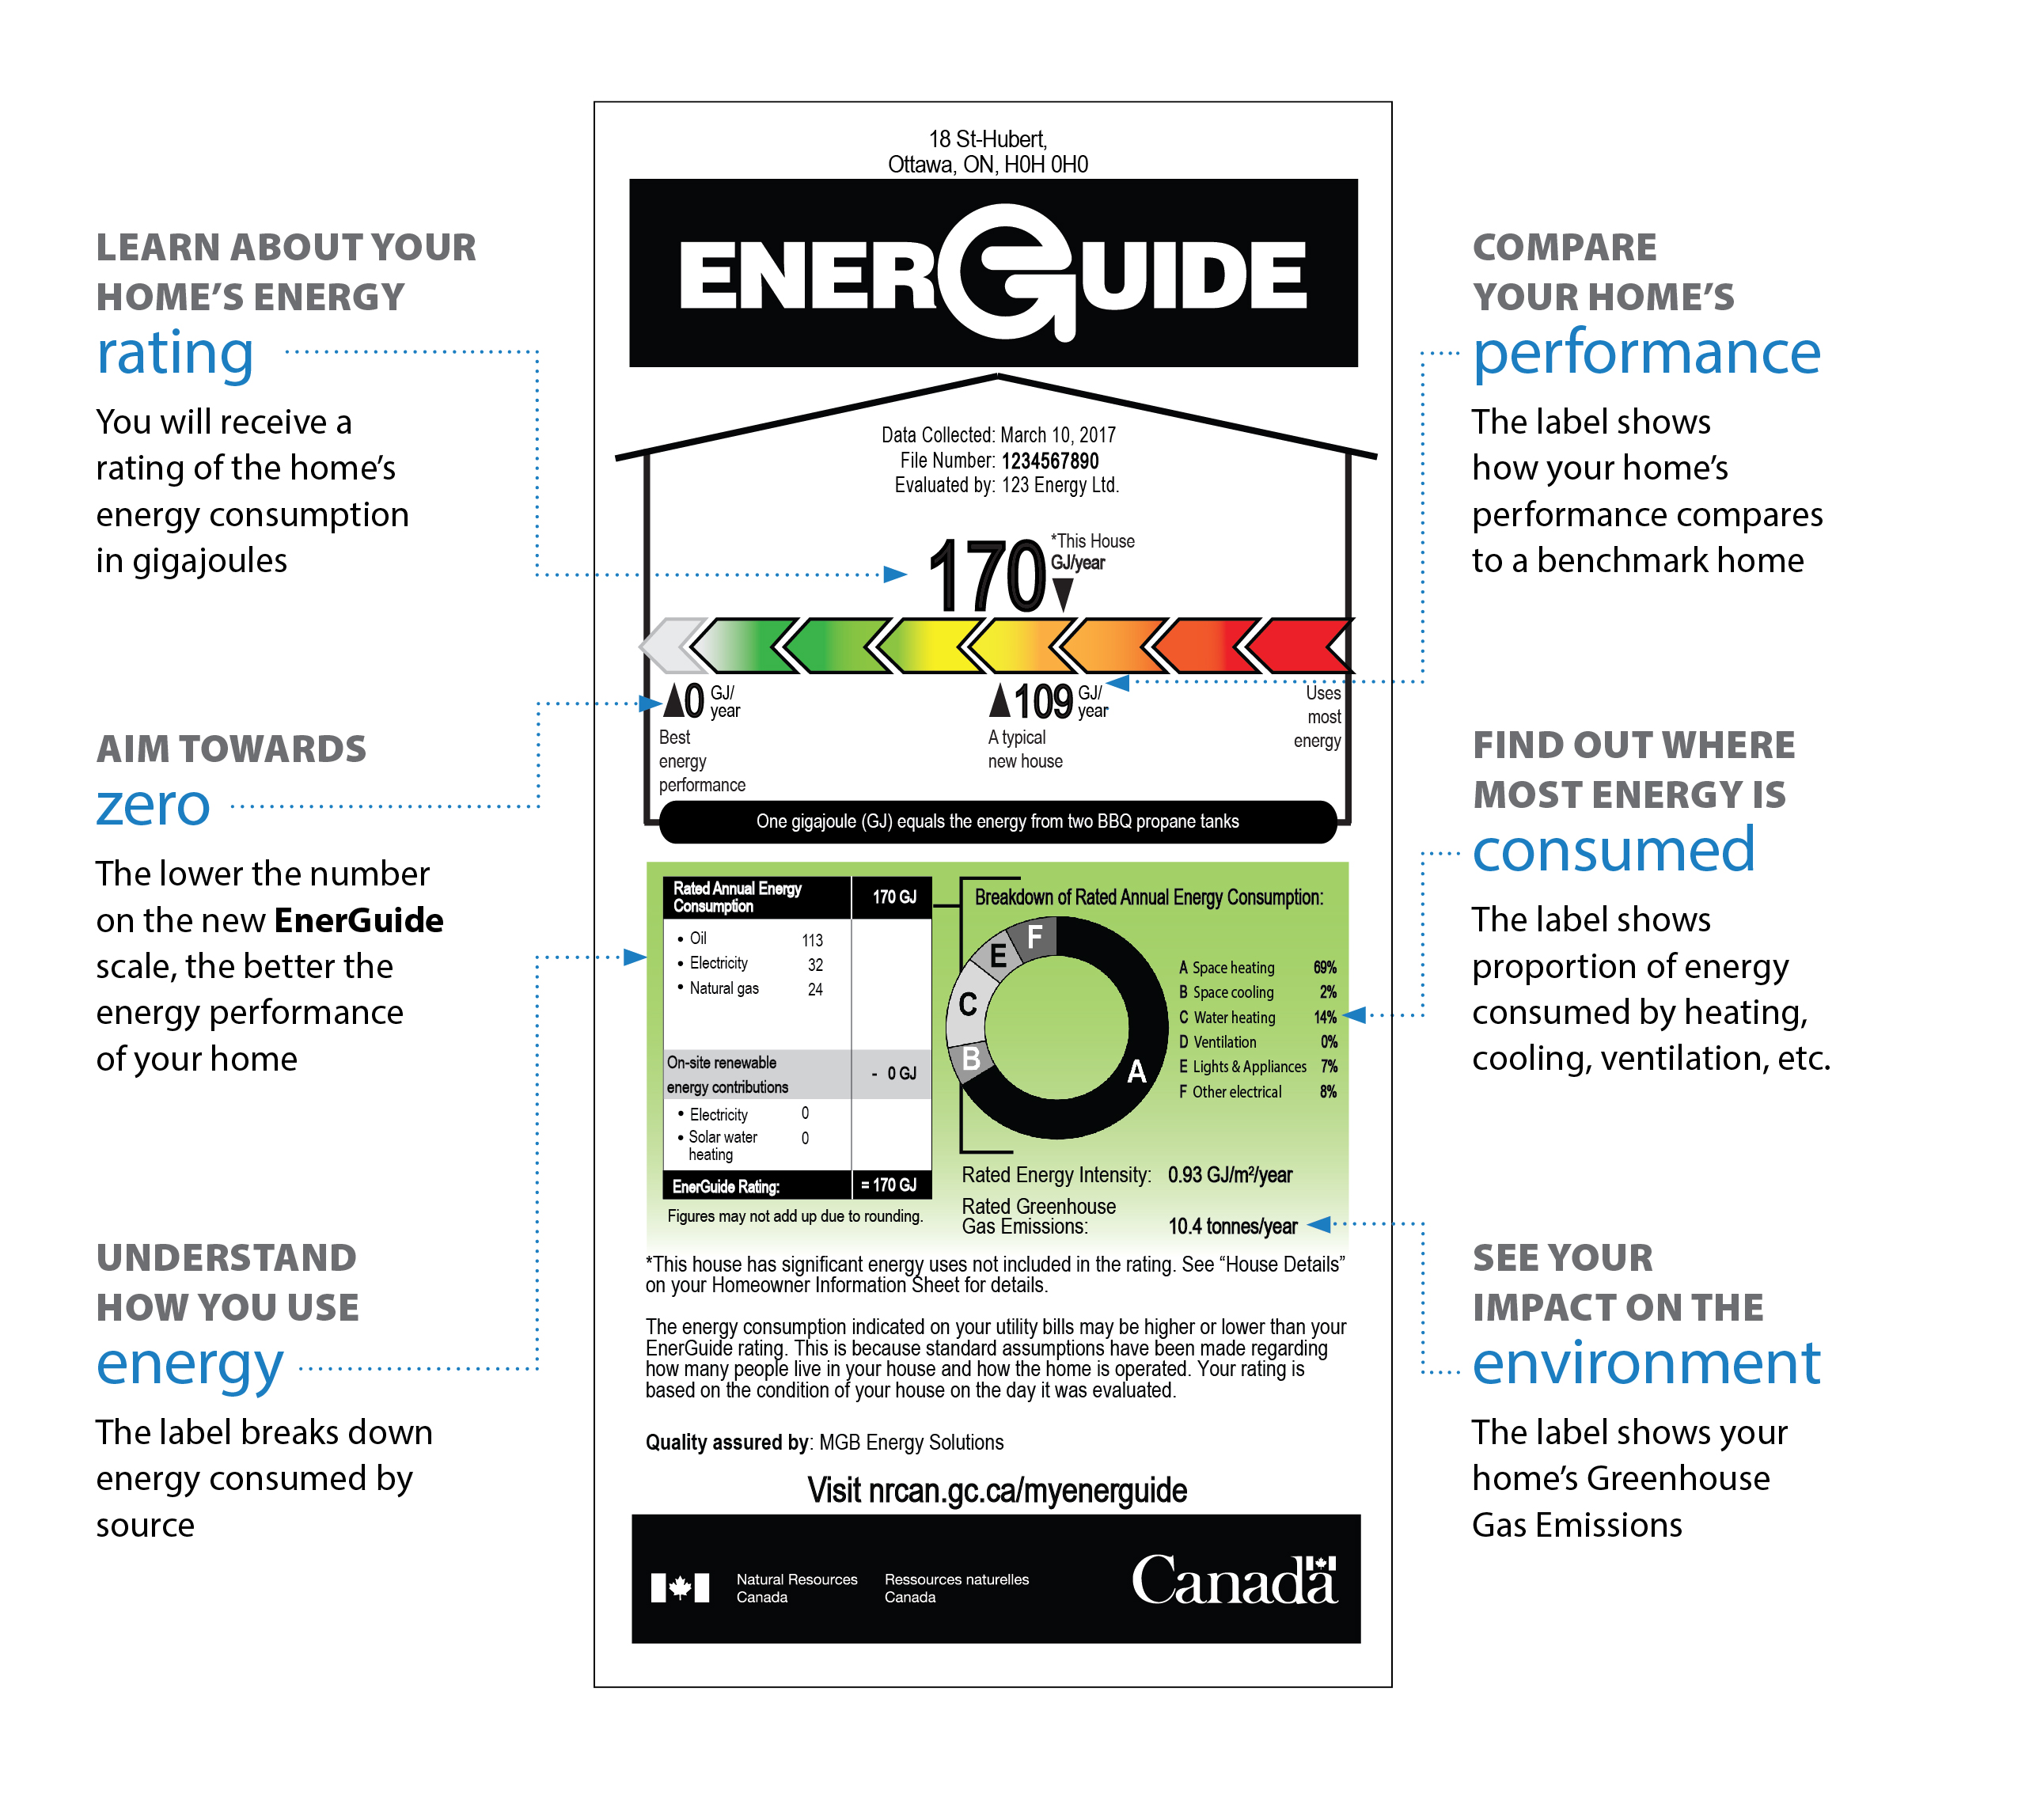 EnerGuide Rating: Gigajoules per Year Scale